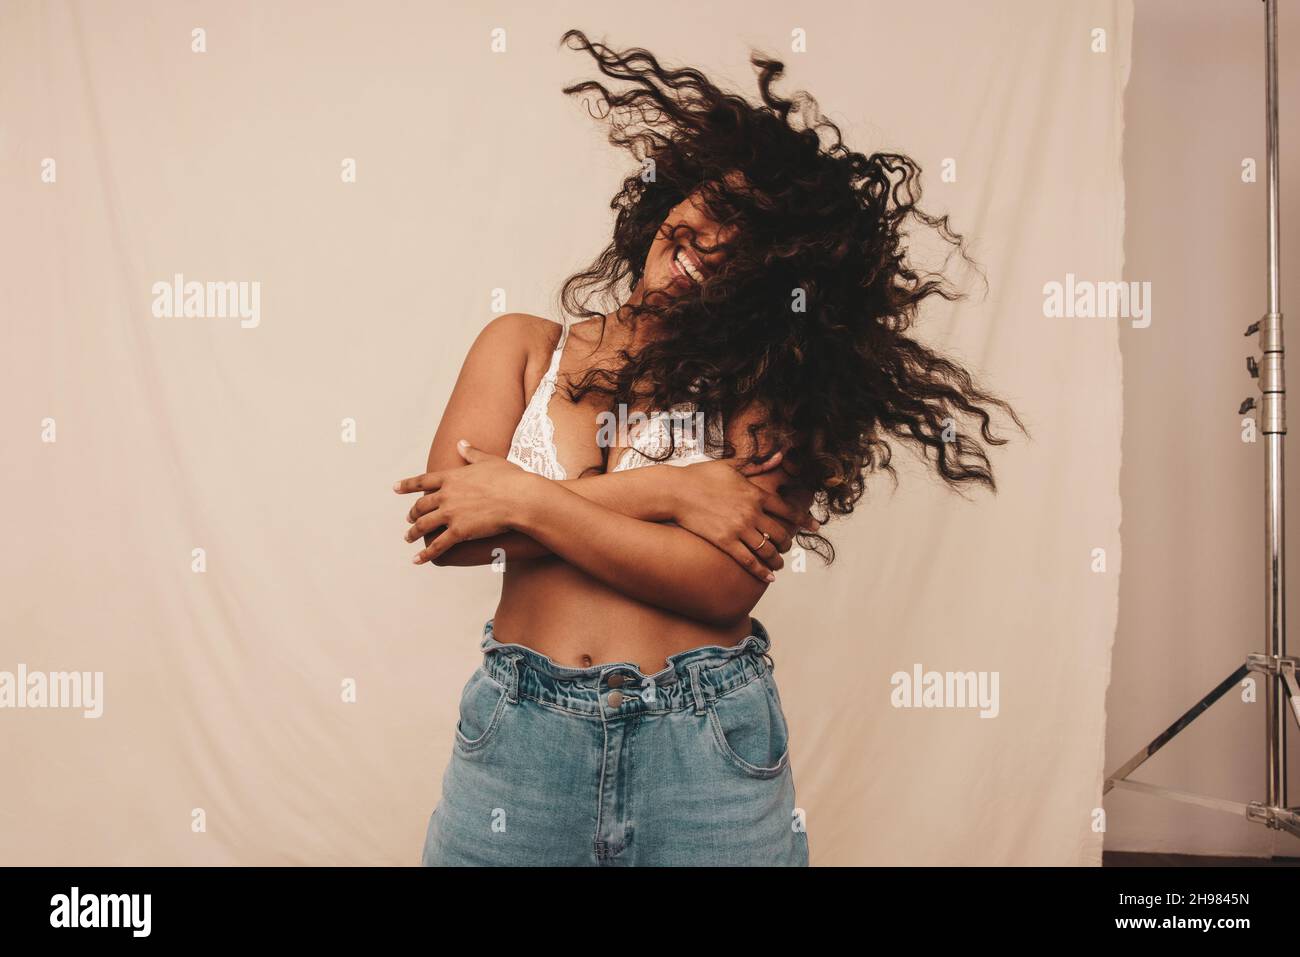 Woman whipping her hair in a studio. Happy young woman laughing cheerfully while standing against a studio background. Body positive young woman feeli Stock Photo